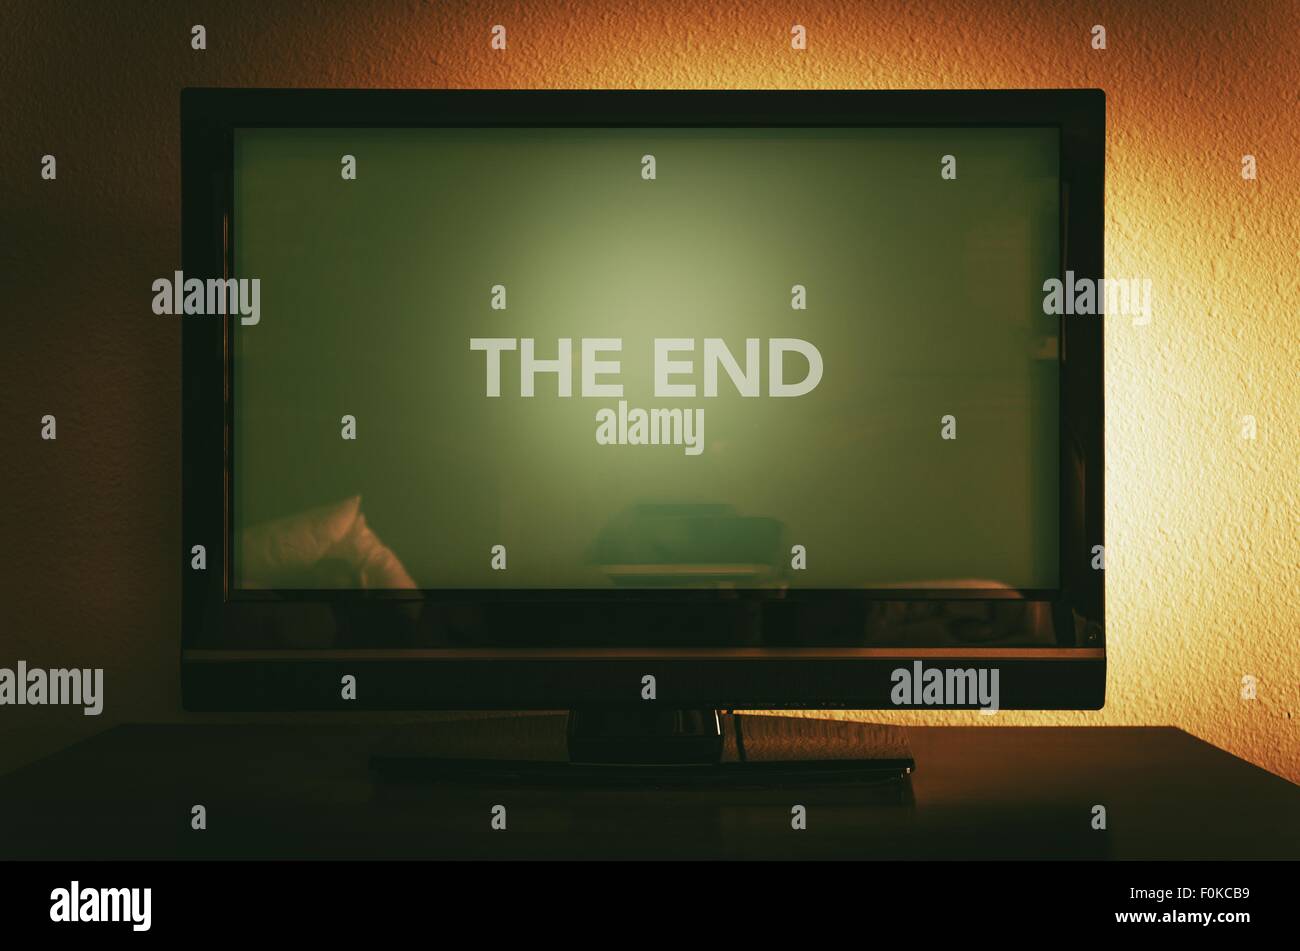 The End of Television Photo Concept. Flat Screen Television Displaying The End information. Stock Photo